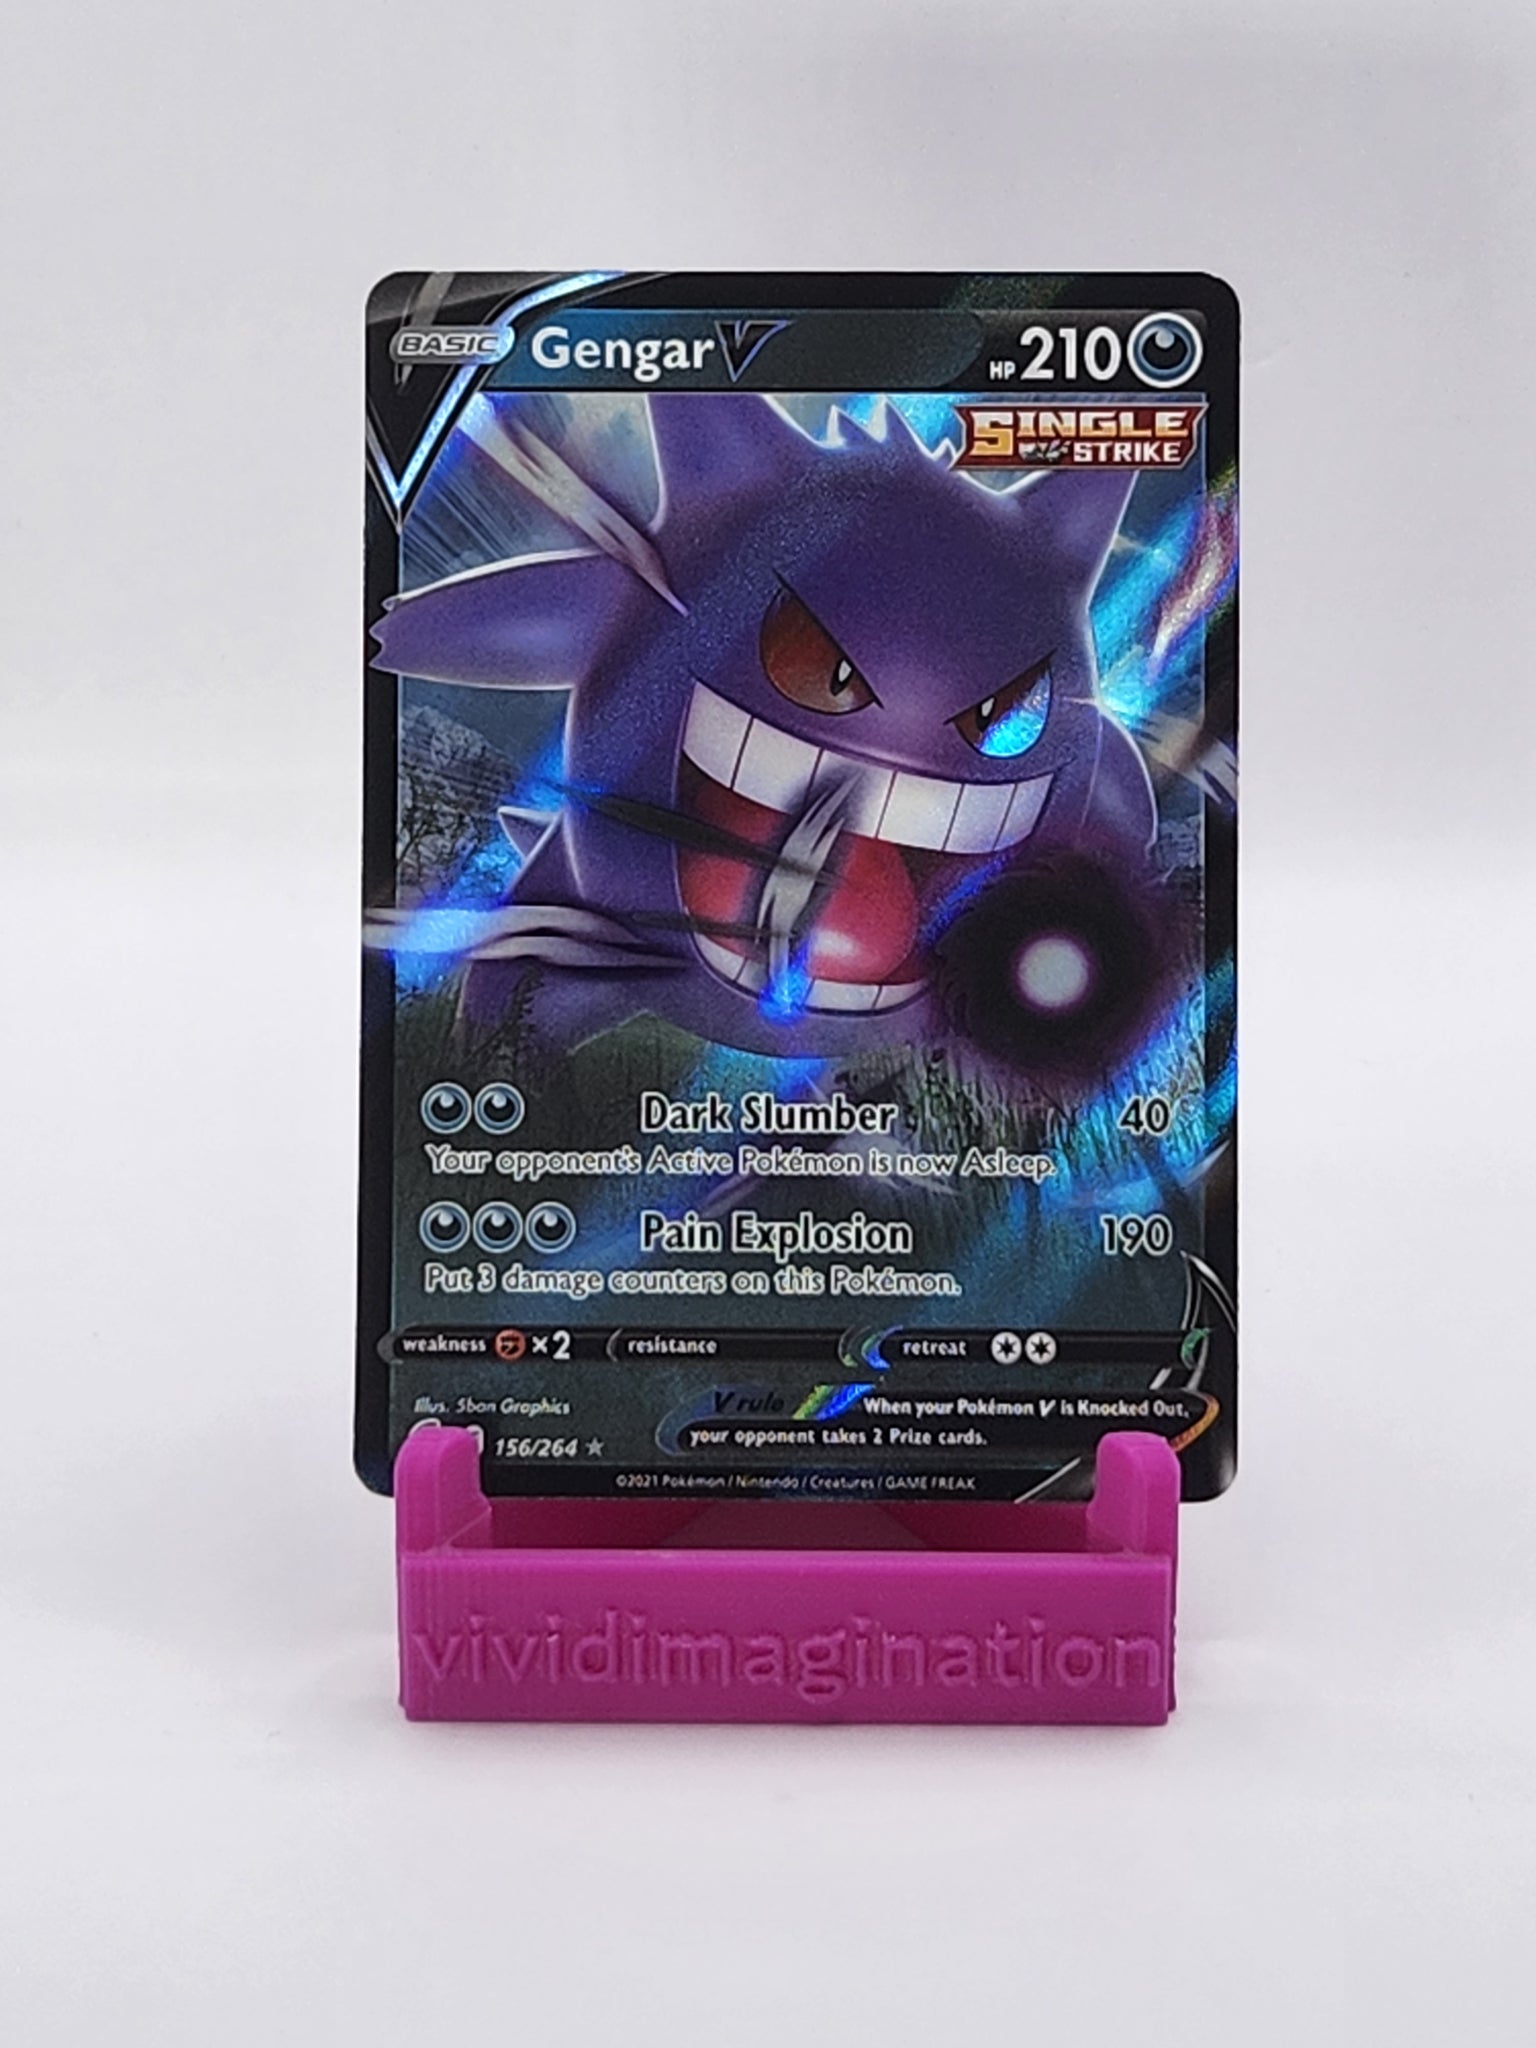 Gengar V 156/264 - All the best items from Vivid Imagination Cards and Collectibles - Just $1.49! Shop now at Vivid Imagination Cards and Collectibles